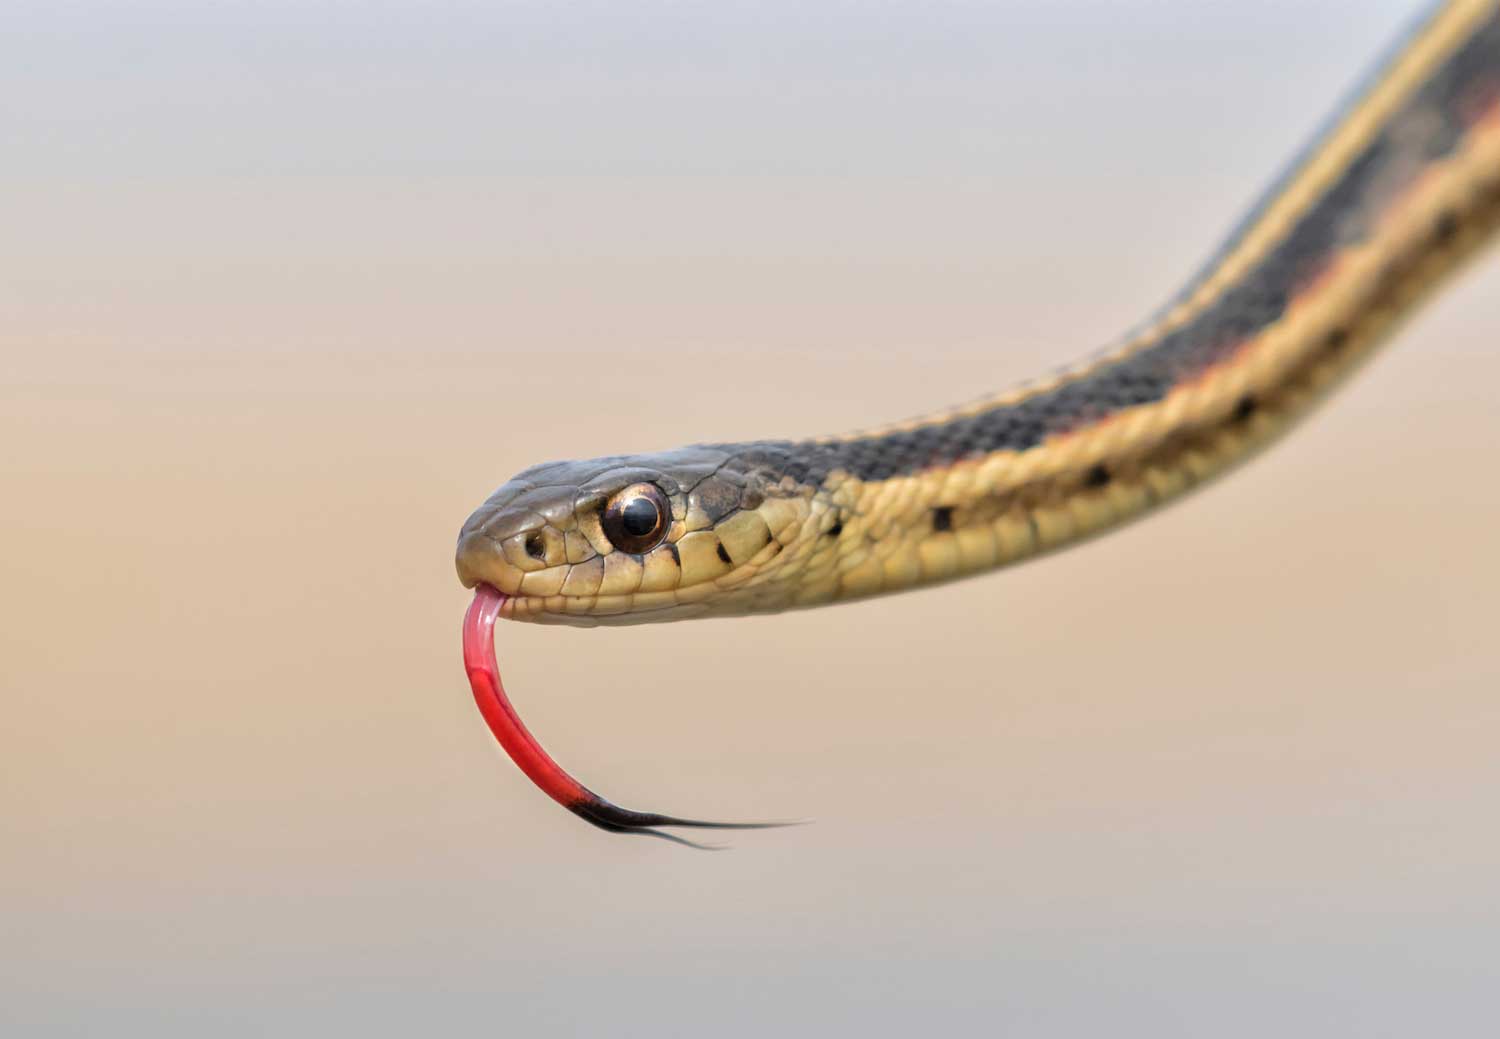 A garter snake with its tongue sticking out.